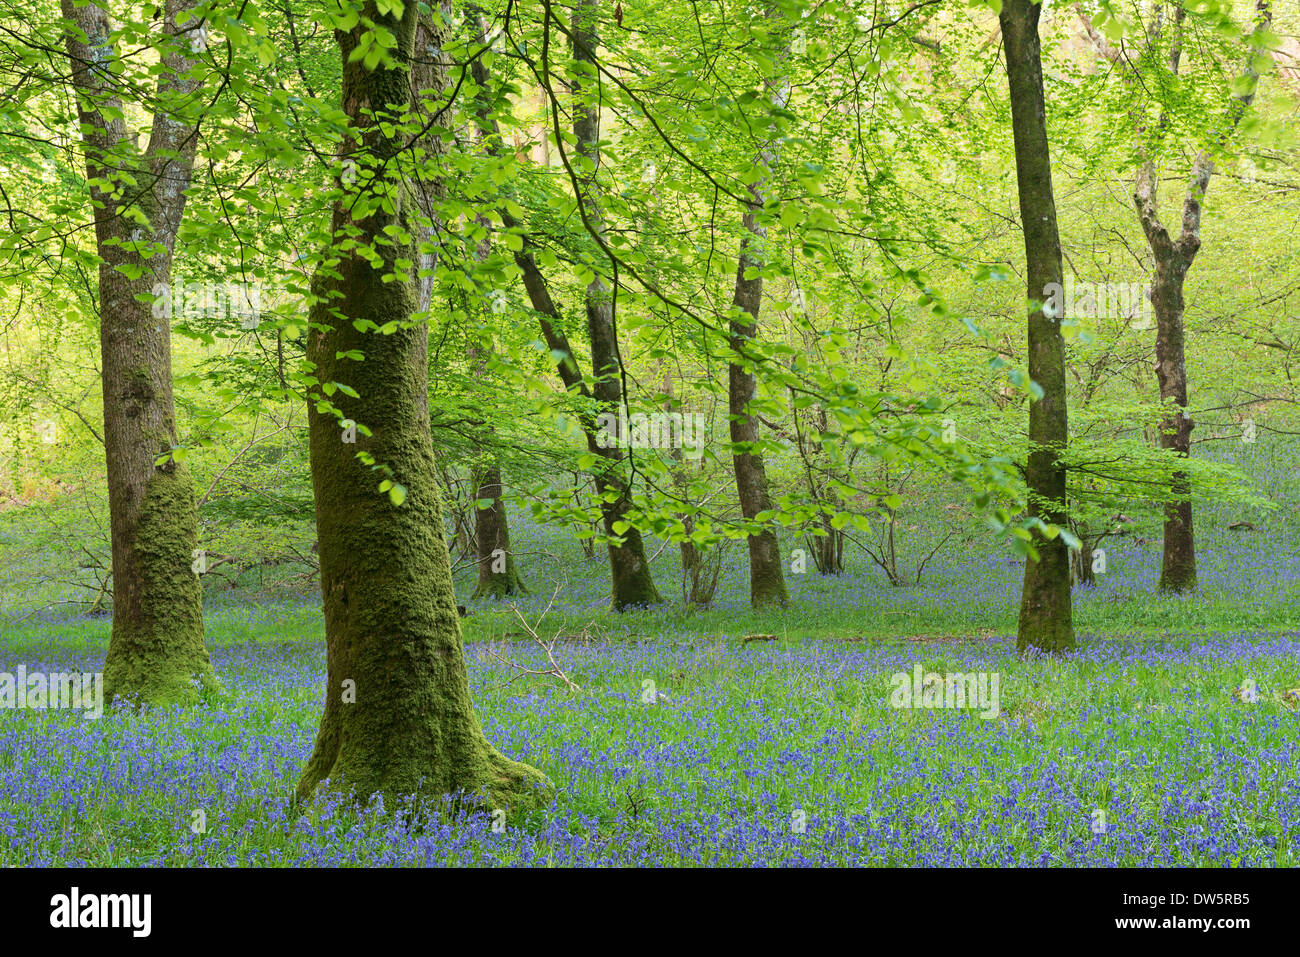 Bluebell woodland in Exmoor National Park, Somerset, England. Spring (May) 2013. Stock Photo